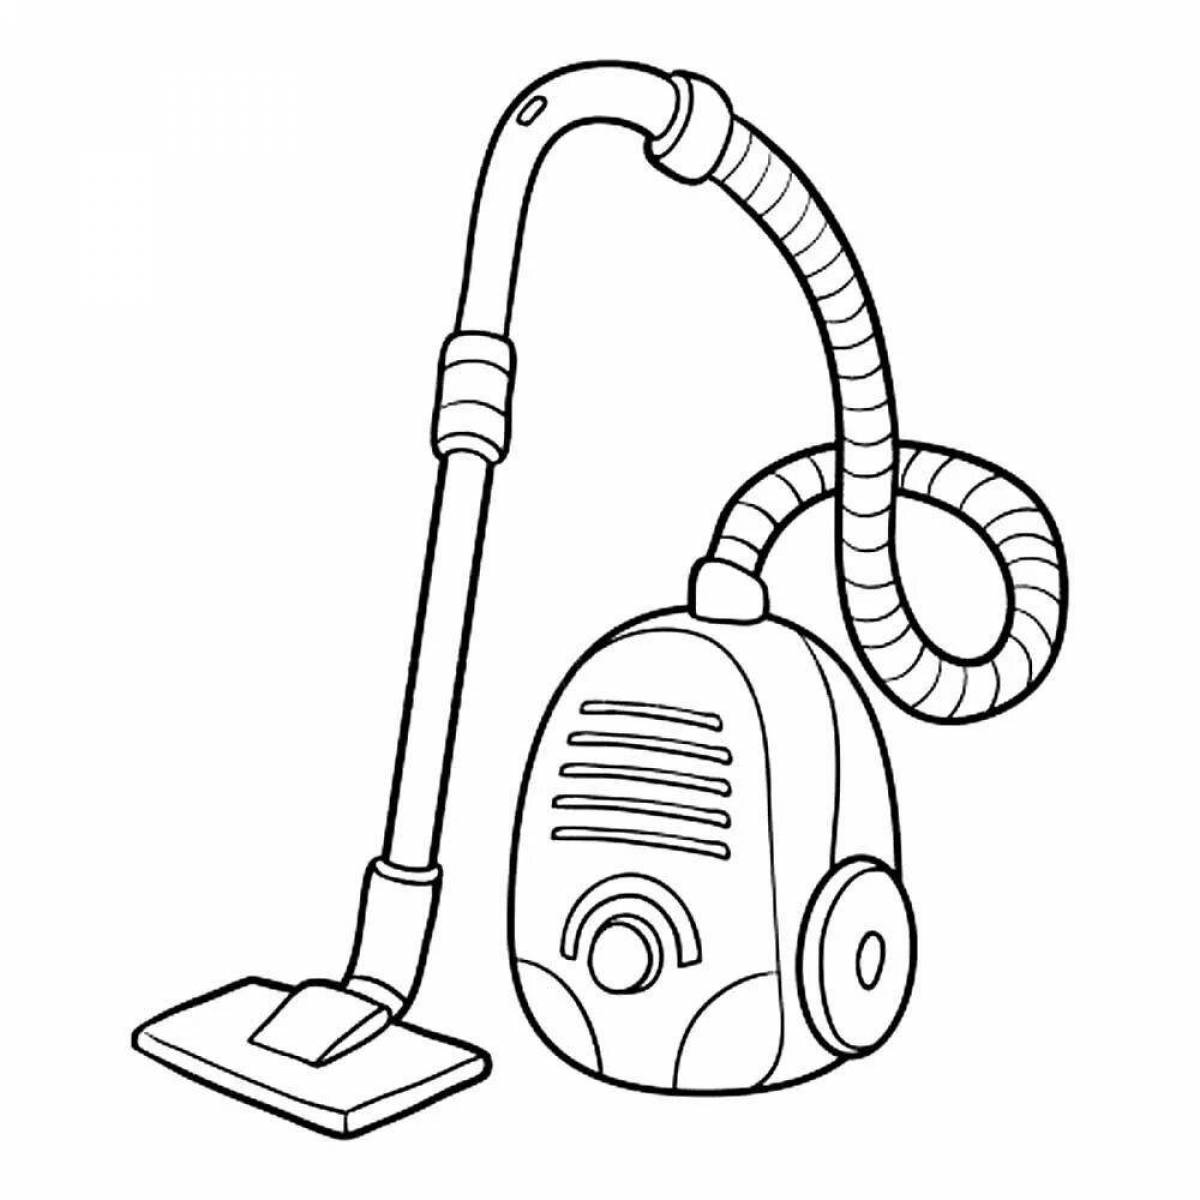 Colorful coloring pages of household appliances for kindergarten